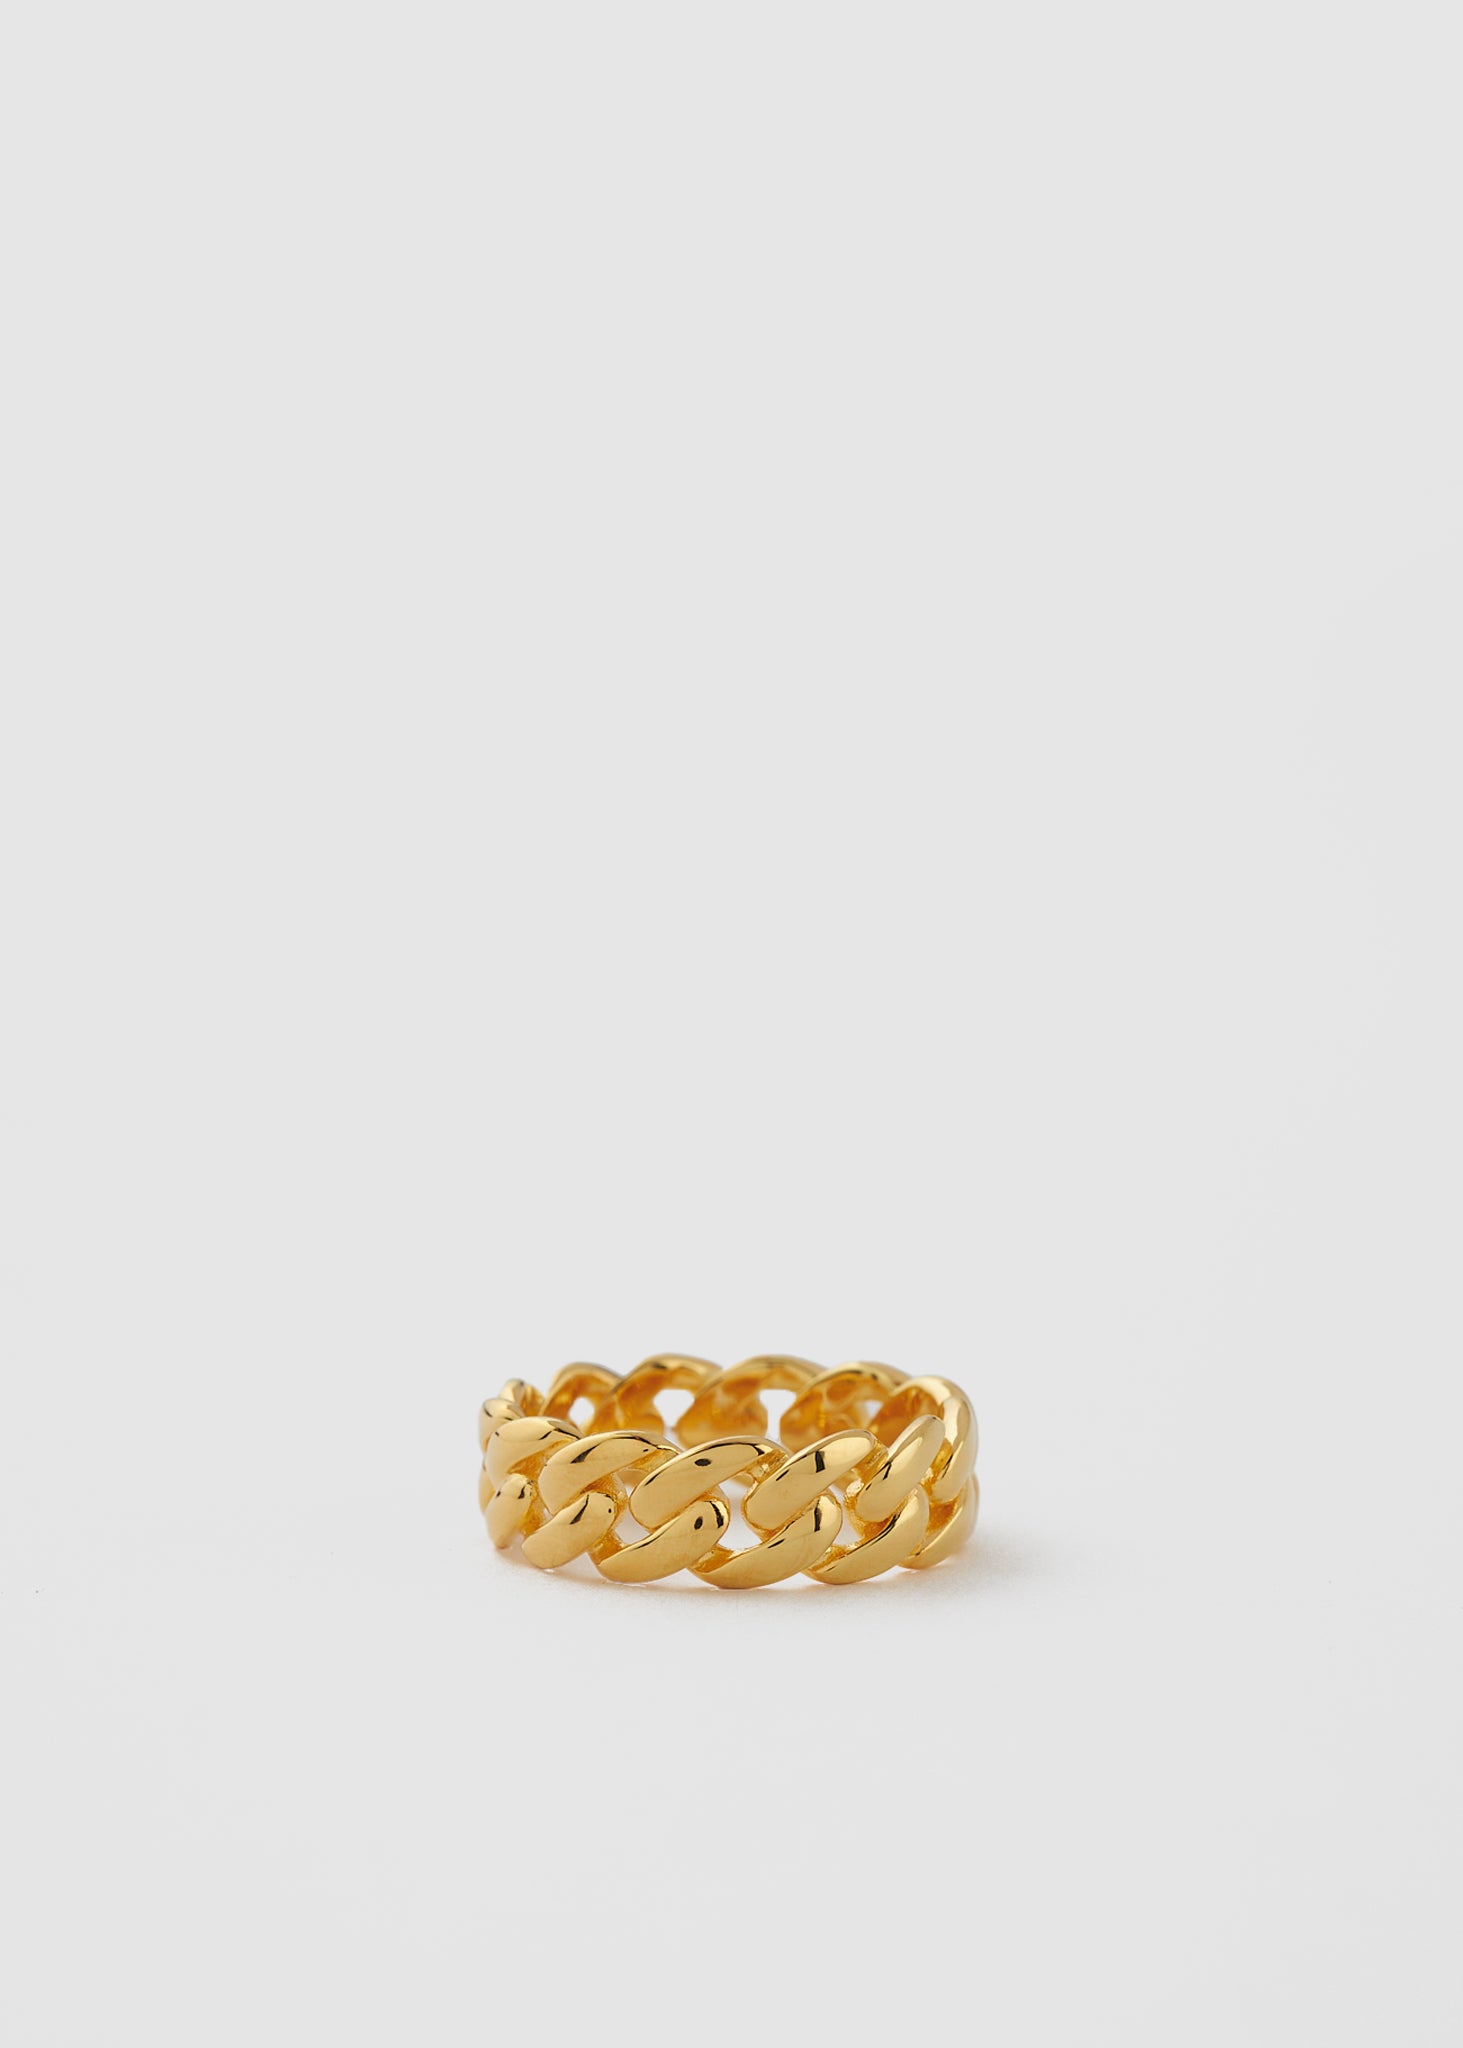 Common Lines Mens Cuban Link Gold Ring